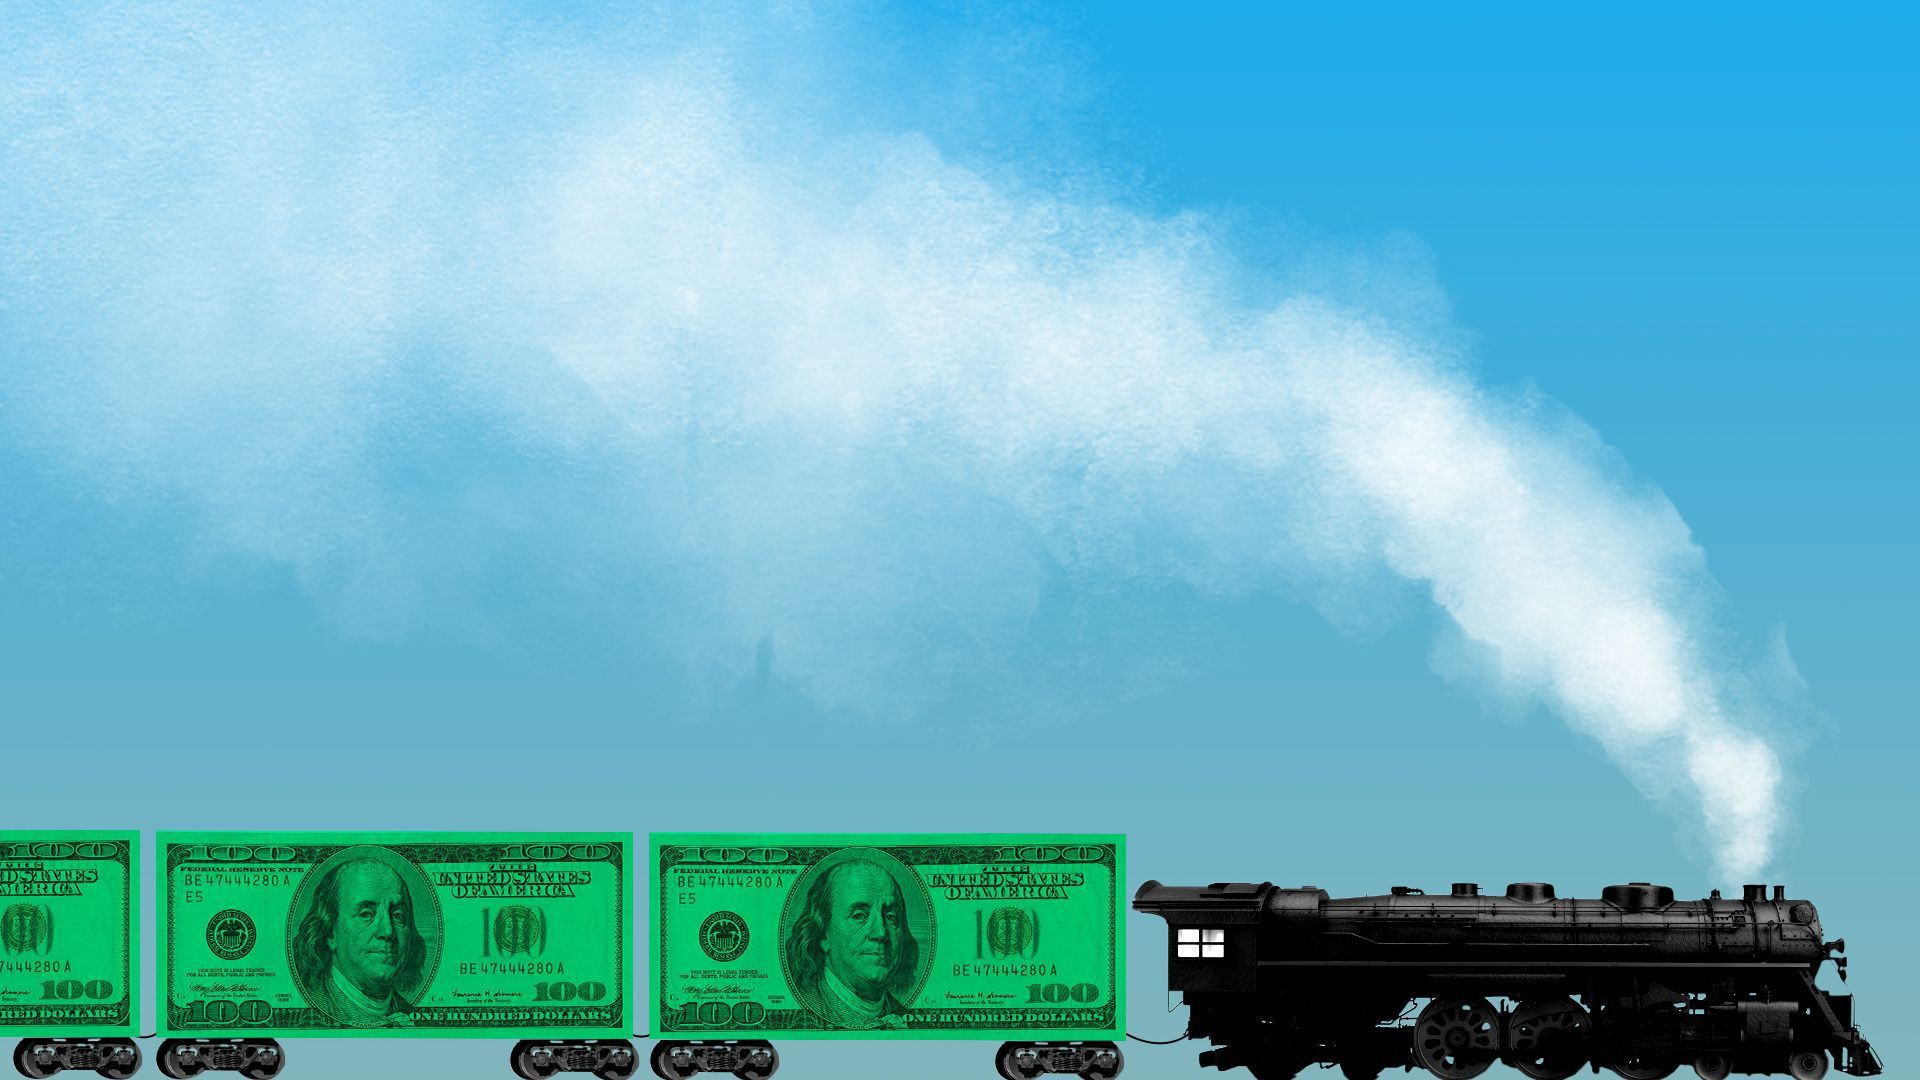 Illustration of a train with cars that look like dollar bills.